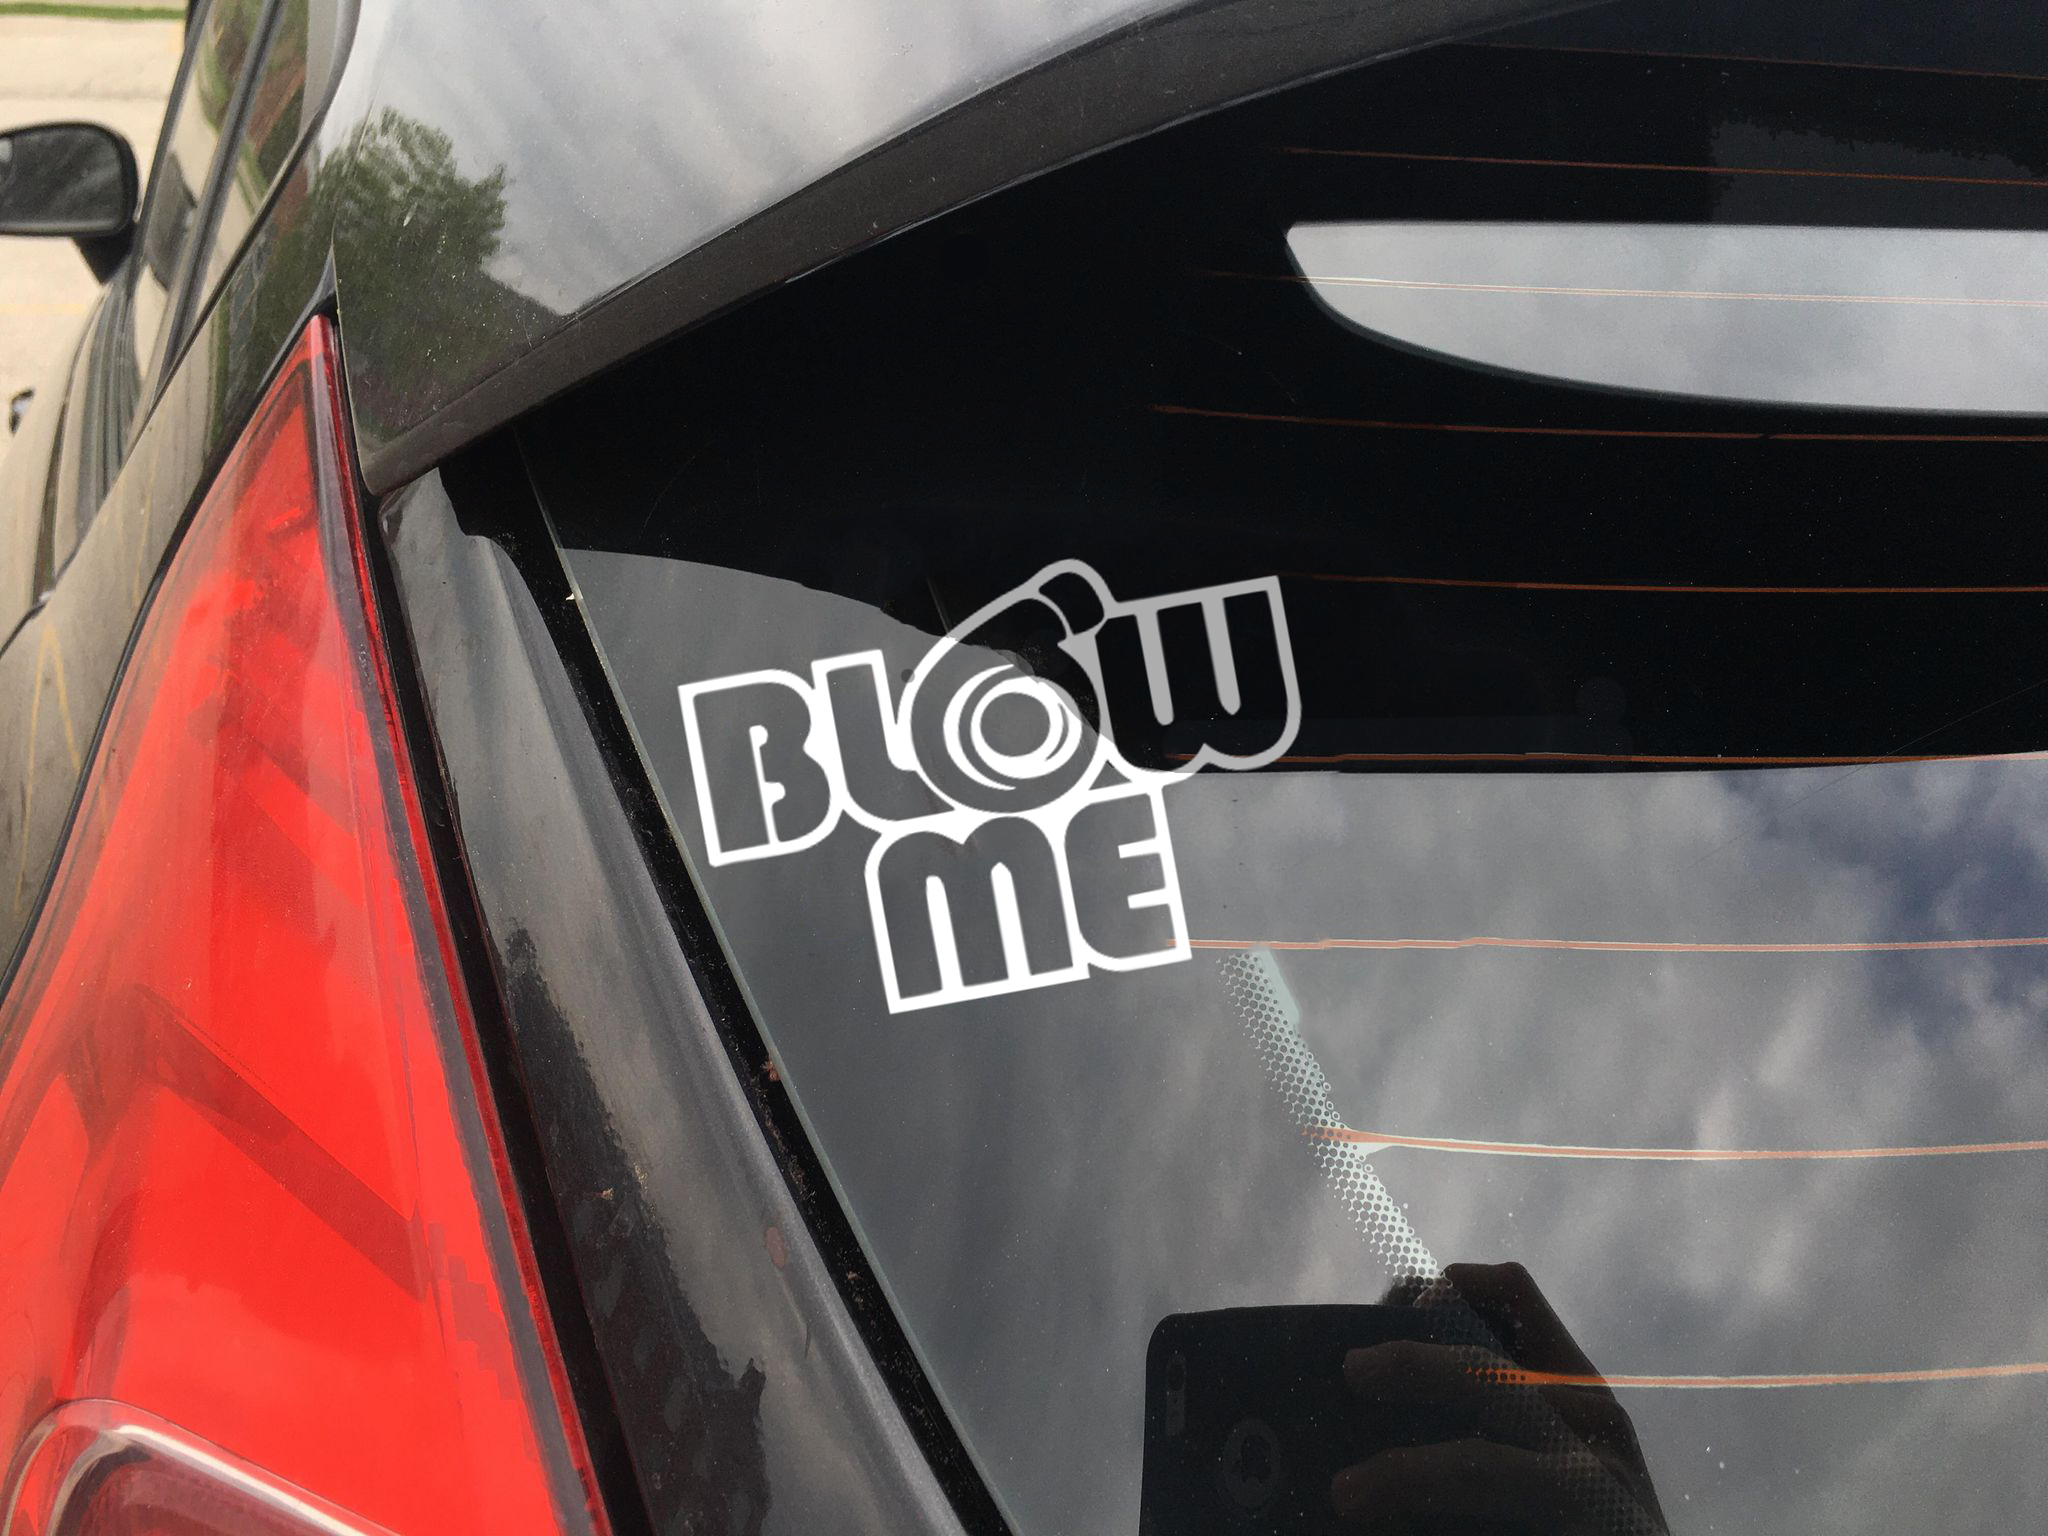 Blow Me Turbo funny car sticker decal